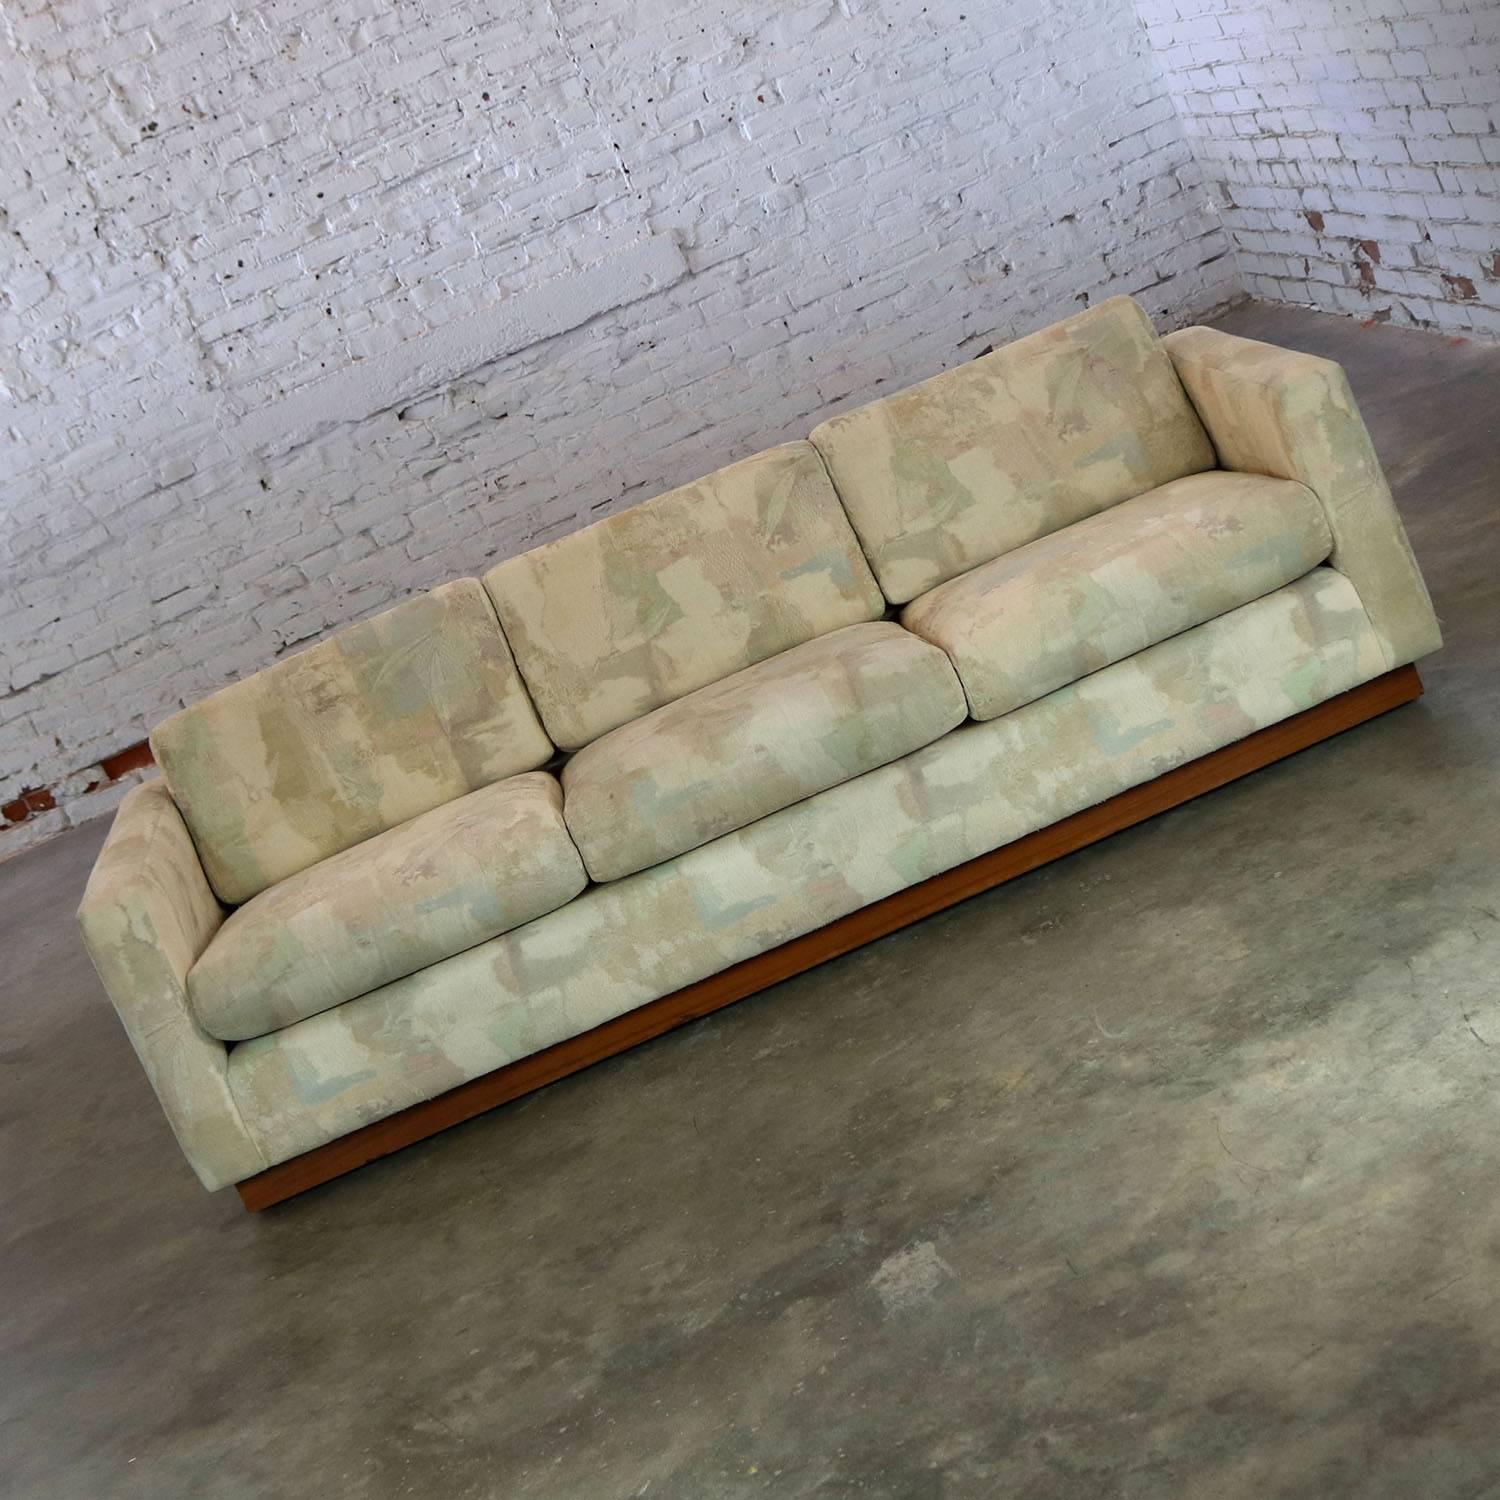 Wonderful floating tuxedo style sofa done in the manner of Milo Baughman for Thayer Coggin. This sofa is in great vintage circa 1970s condition. There are some chips to the veneer on the bottom edge of the recessed platform base; however, they are